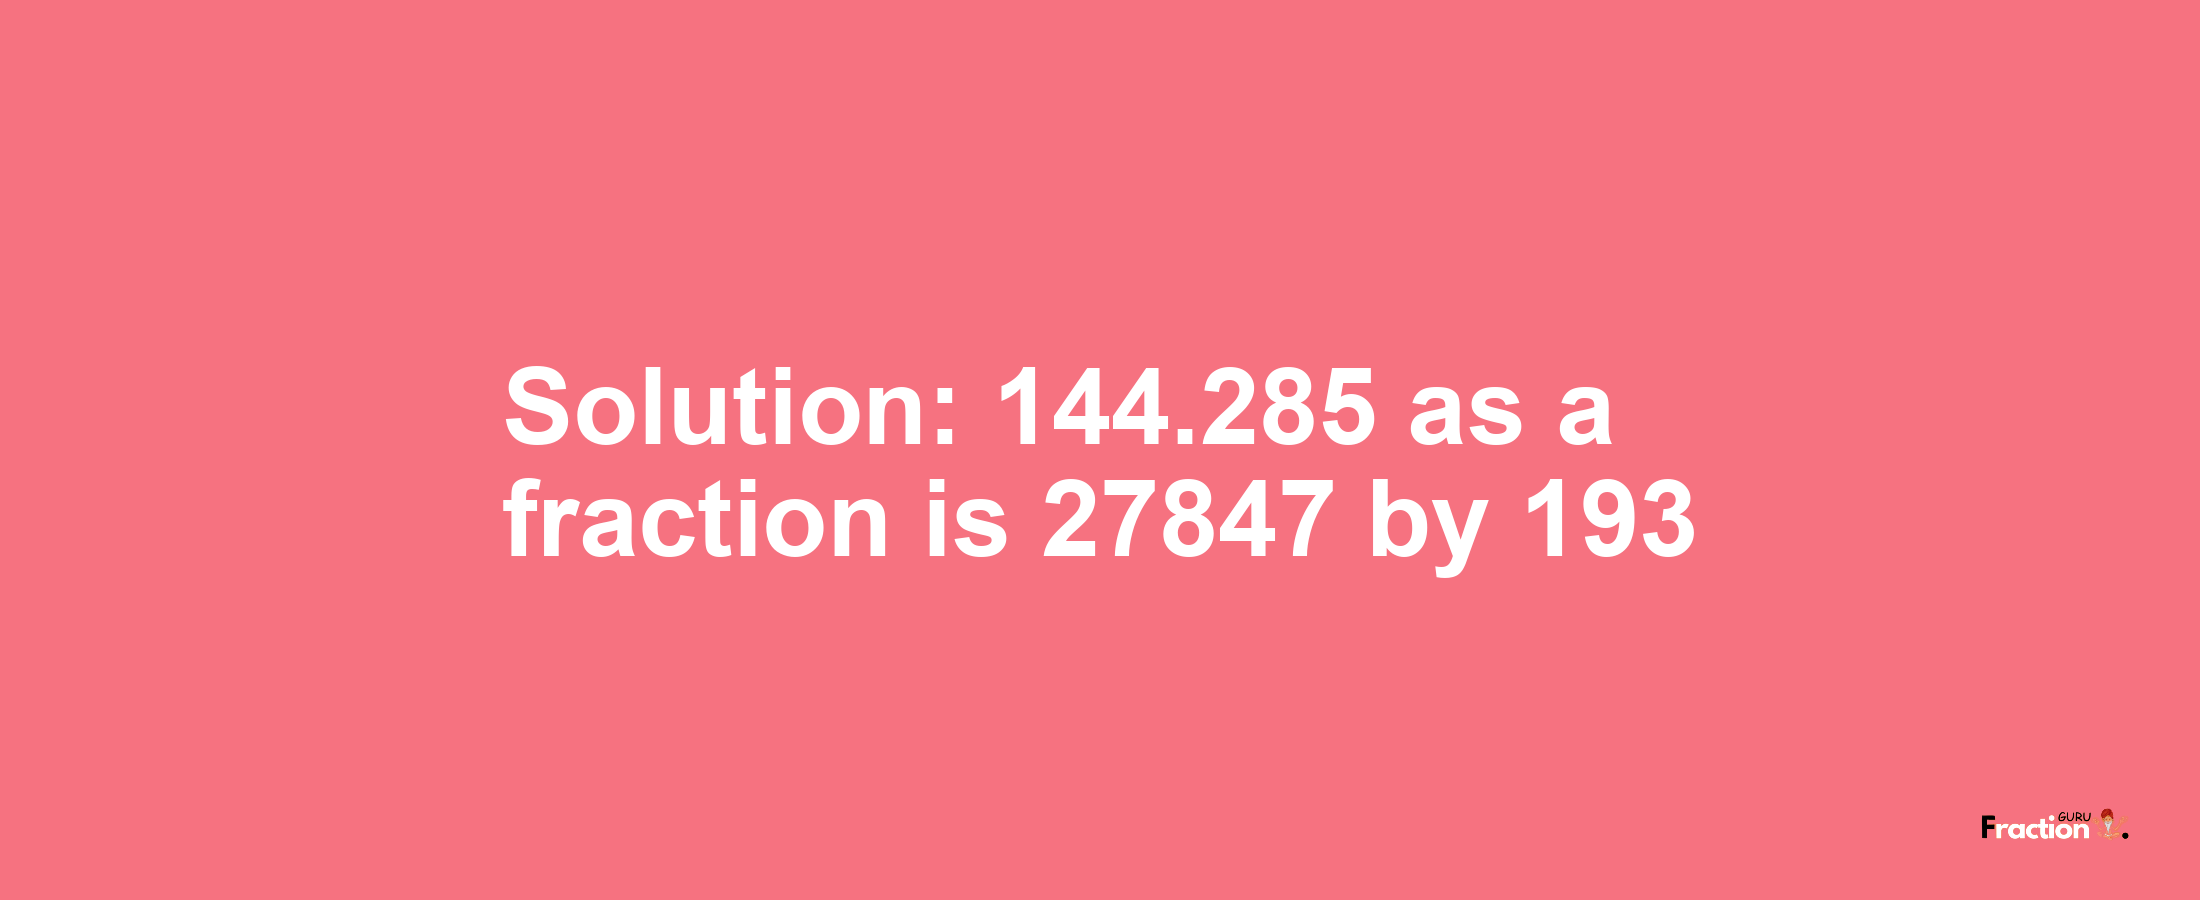 Solution:144.285 as a fraction is 27847/193